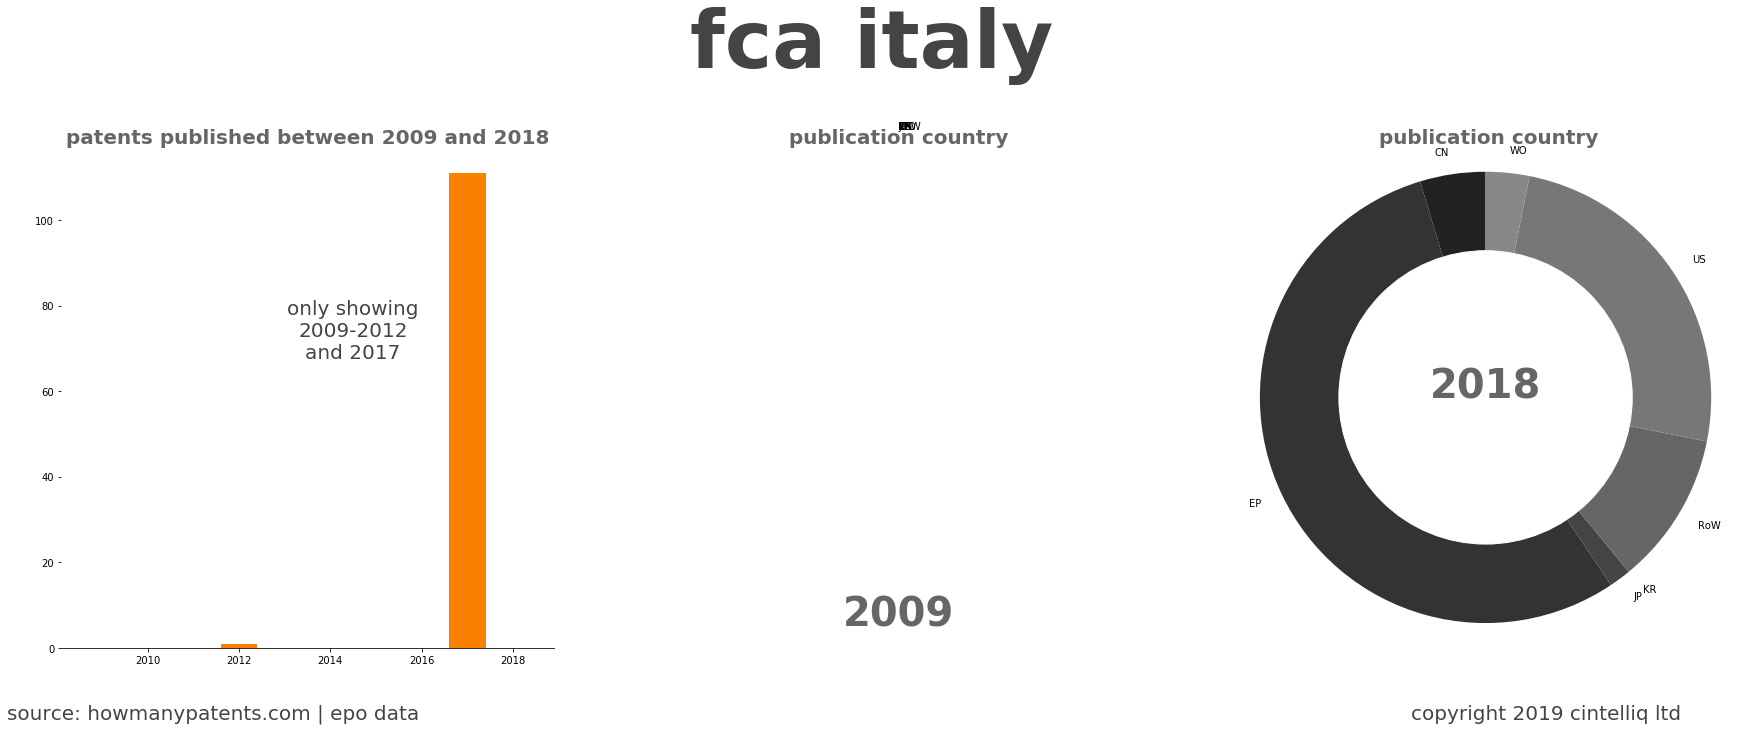 summary of patents for Fca Italy